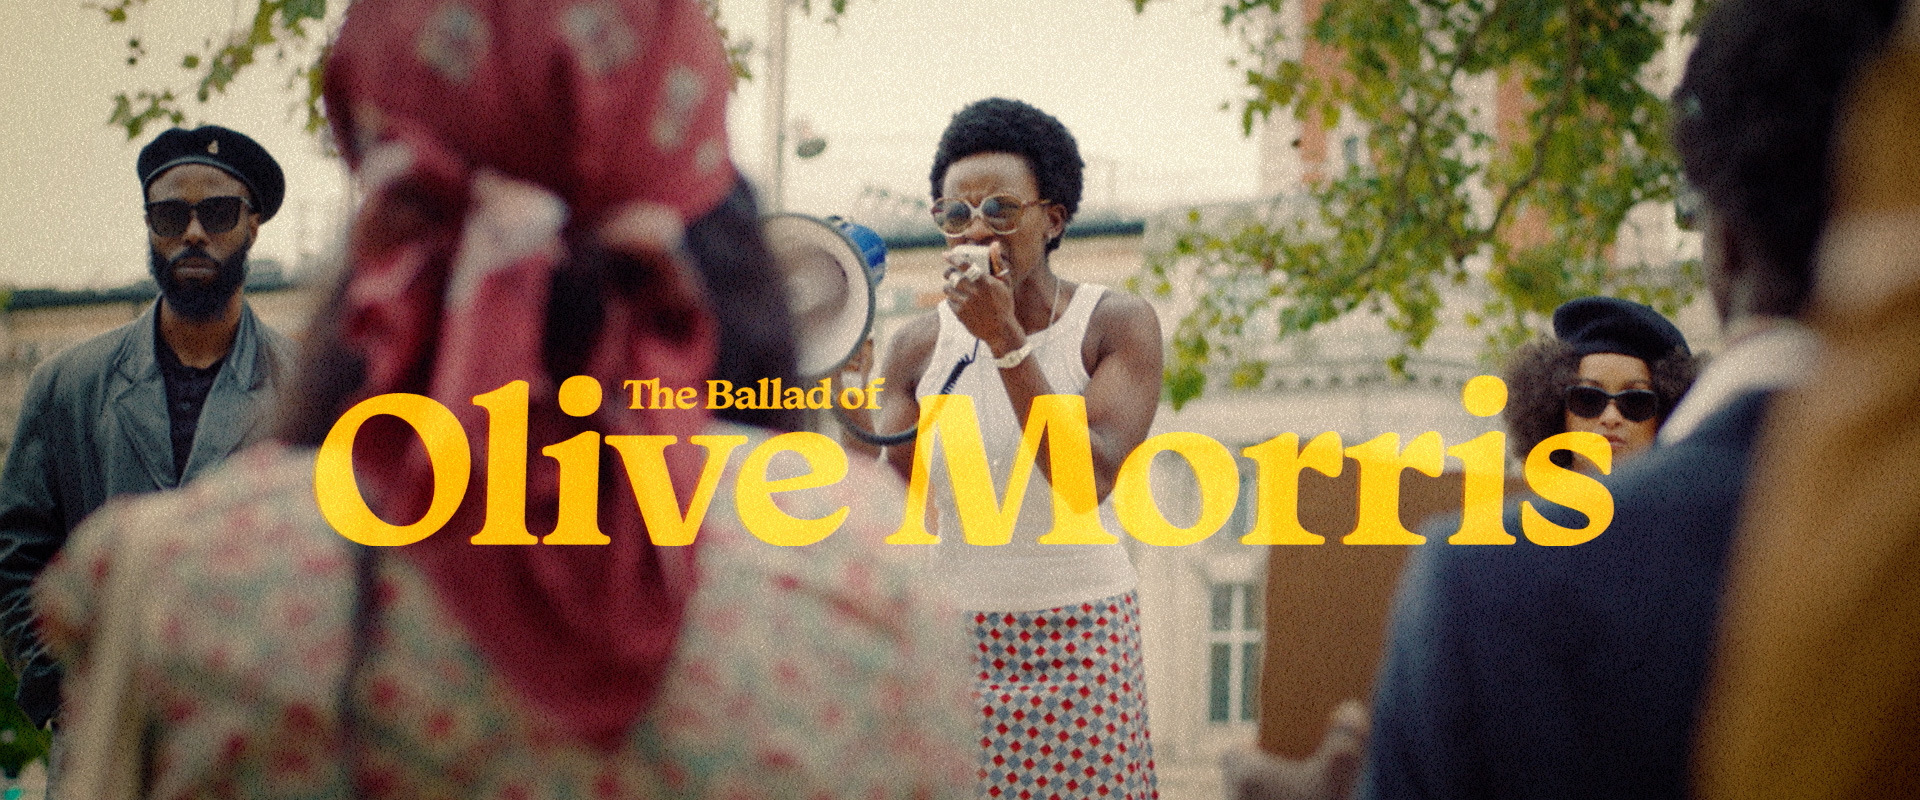 The Ballad of Olive Morris